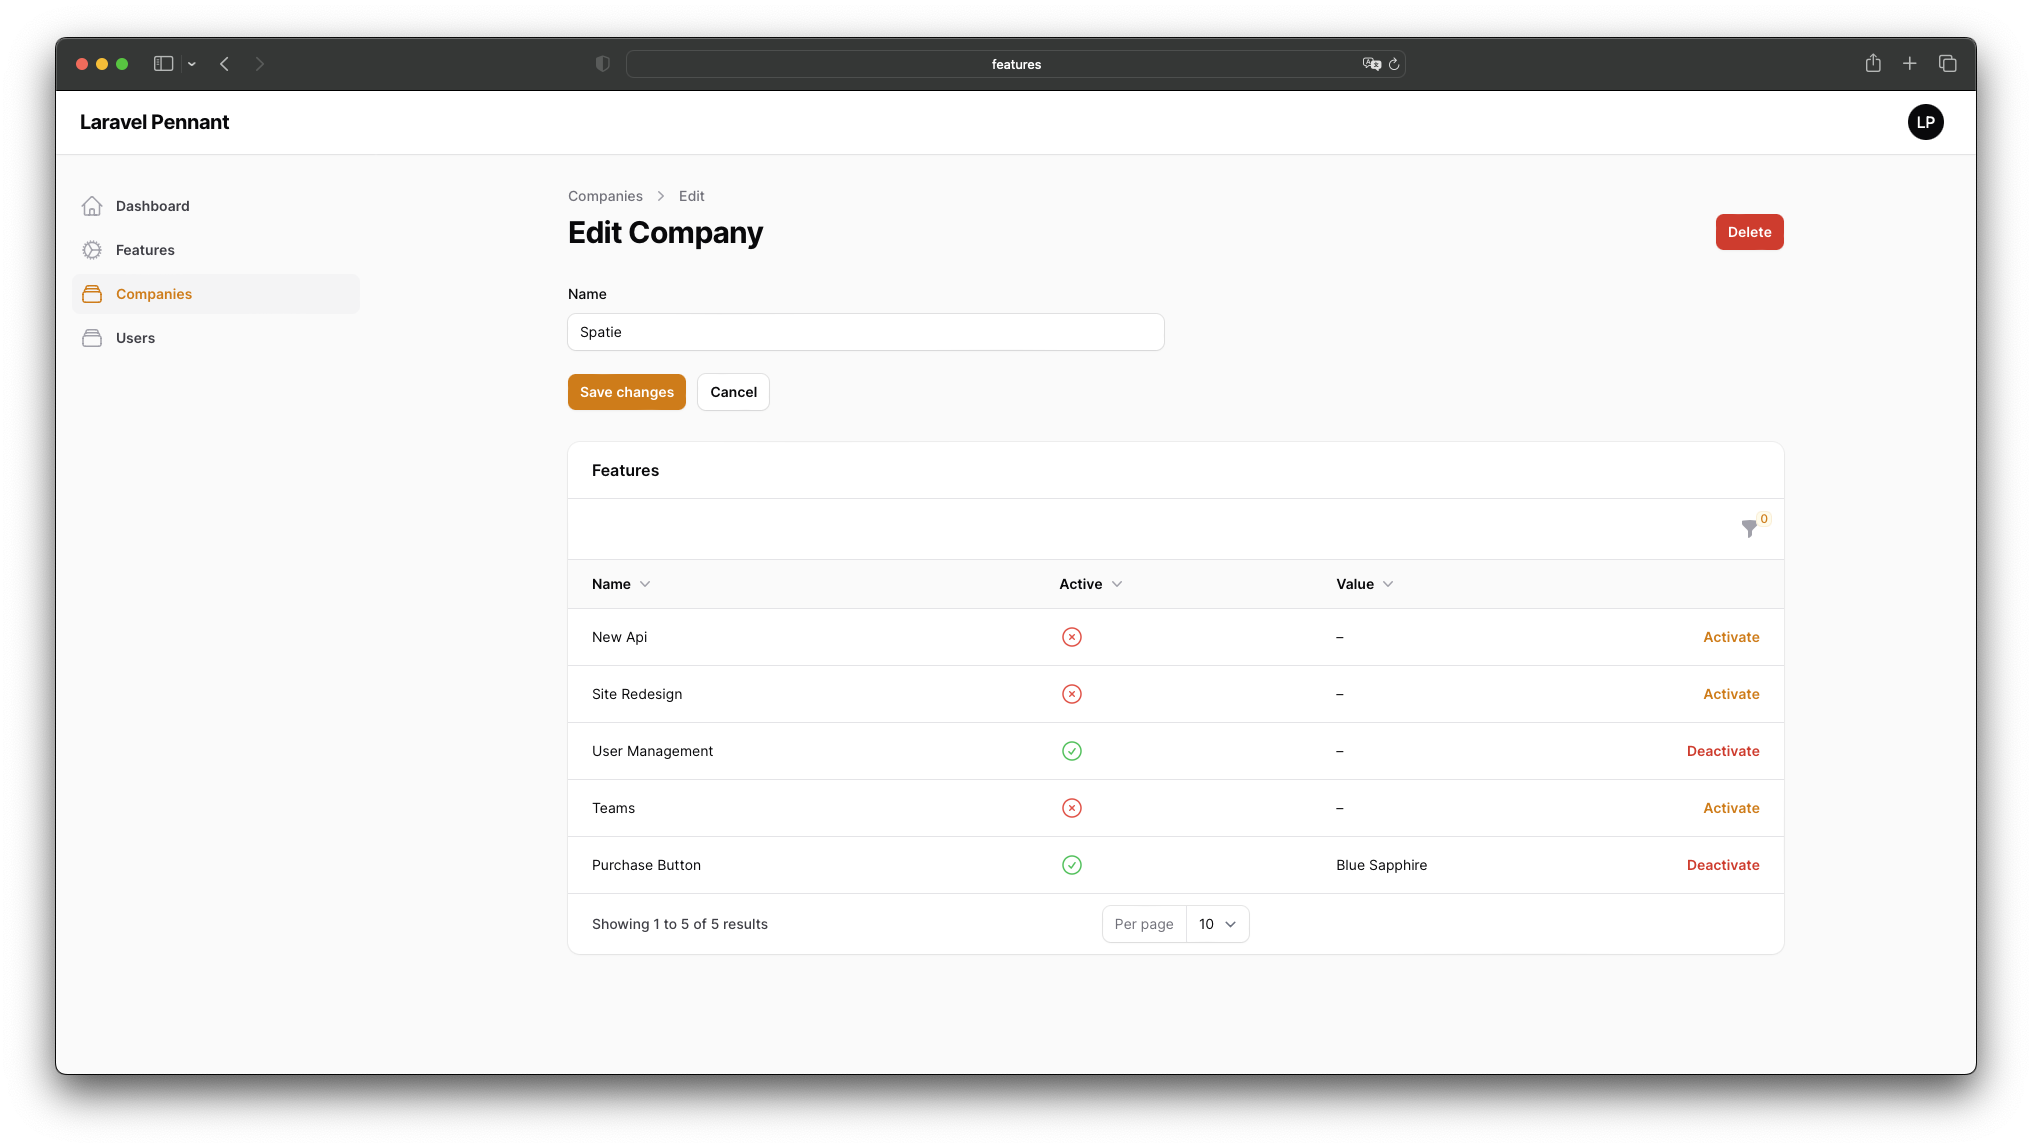 Showcasing an overview of feature flags associated with a company